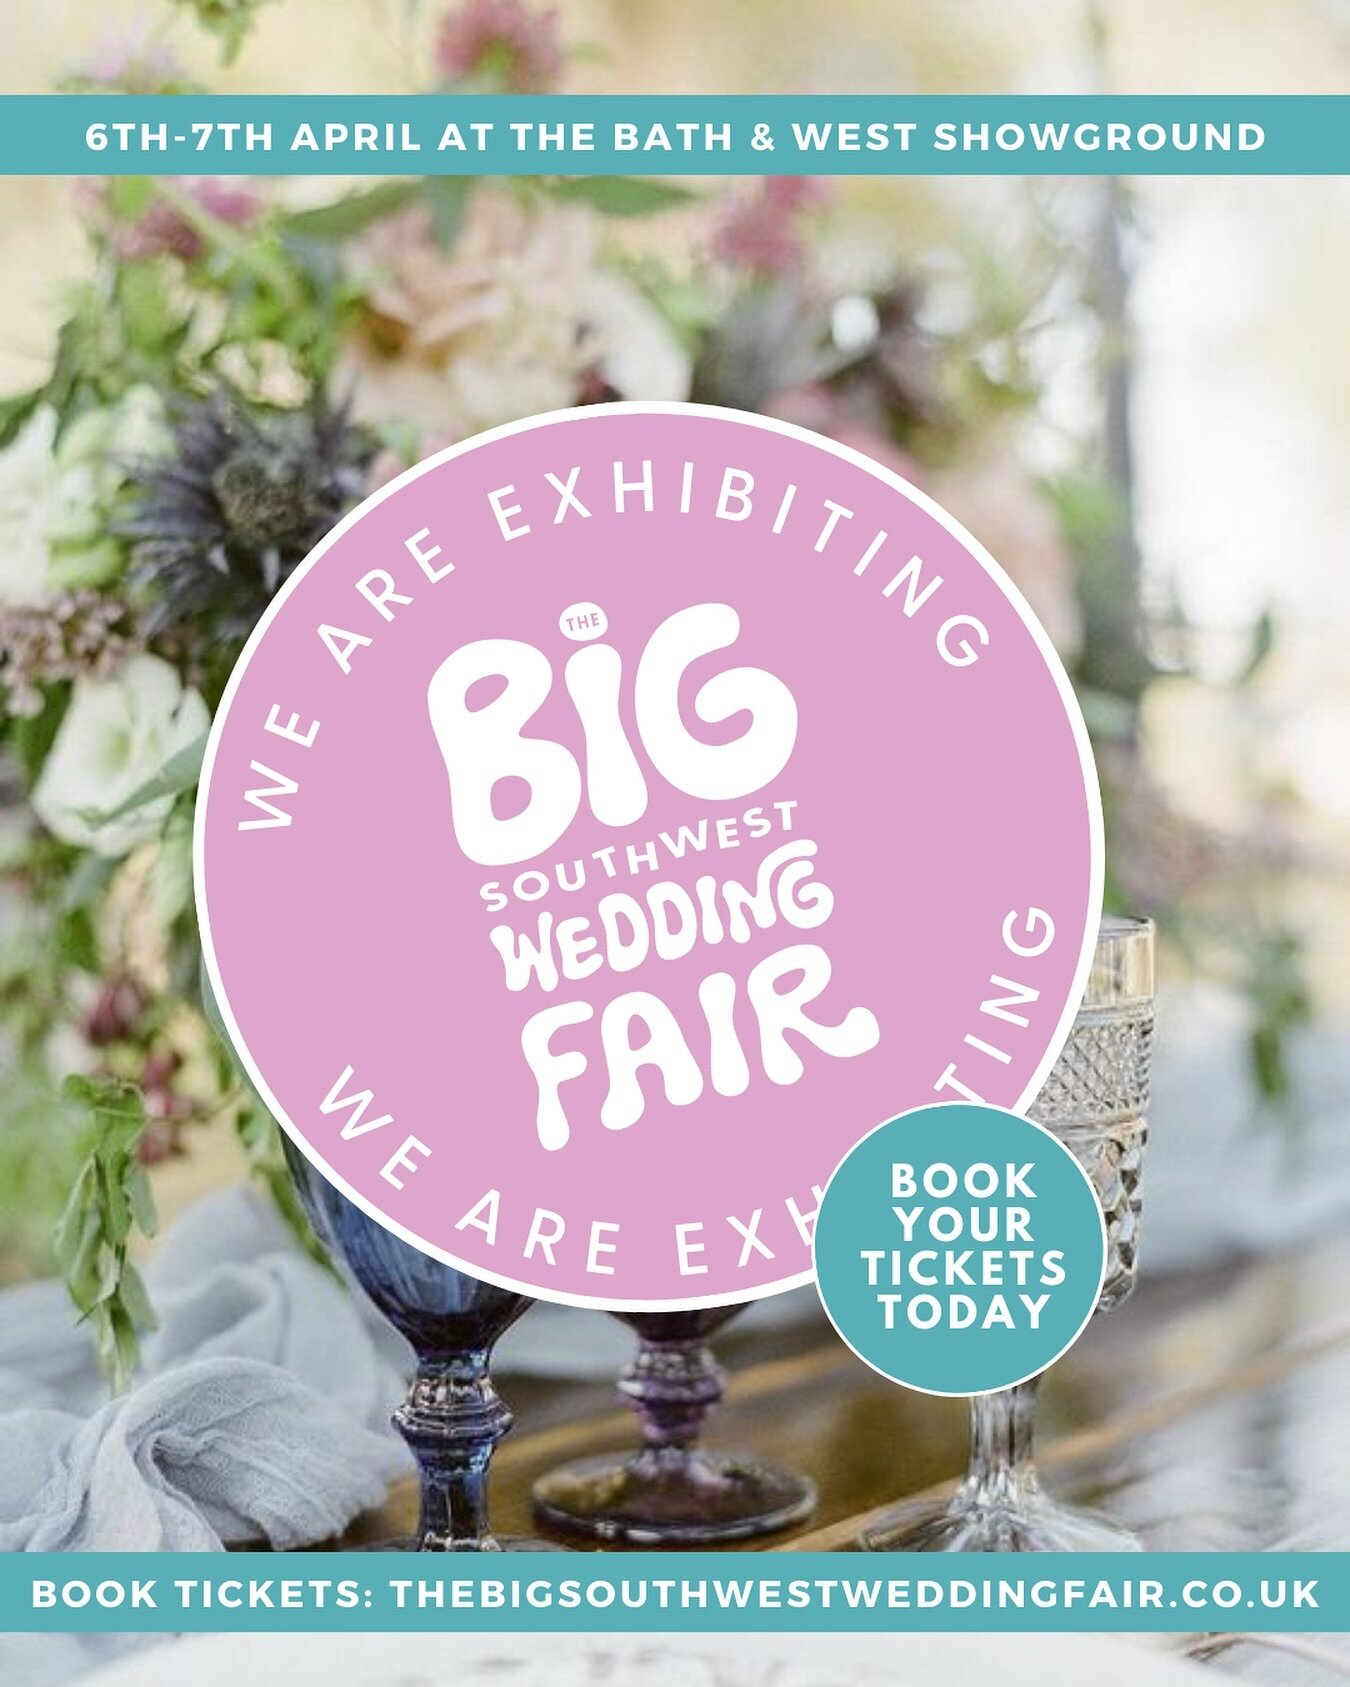 We will be exhibiting at the @thebigswweddingfair from tomorrow. If you are getting married, grab a ticket and come say hi to all the suppliers. We are available to help make your day even more special ✨ 

#thebigswweddingfair #bathandwestshowground 